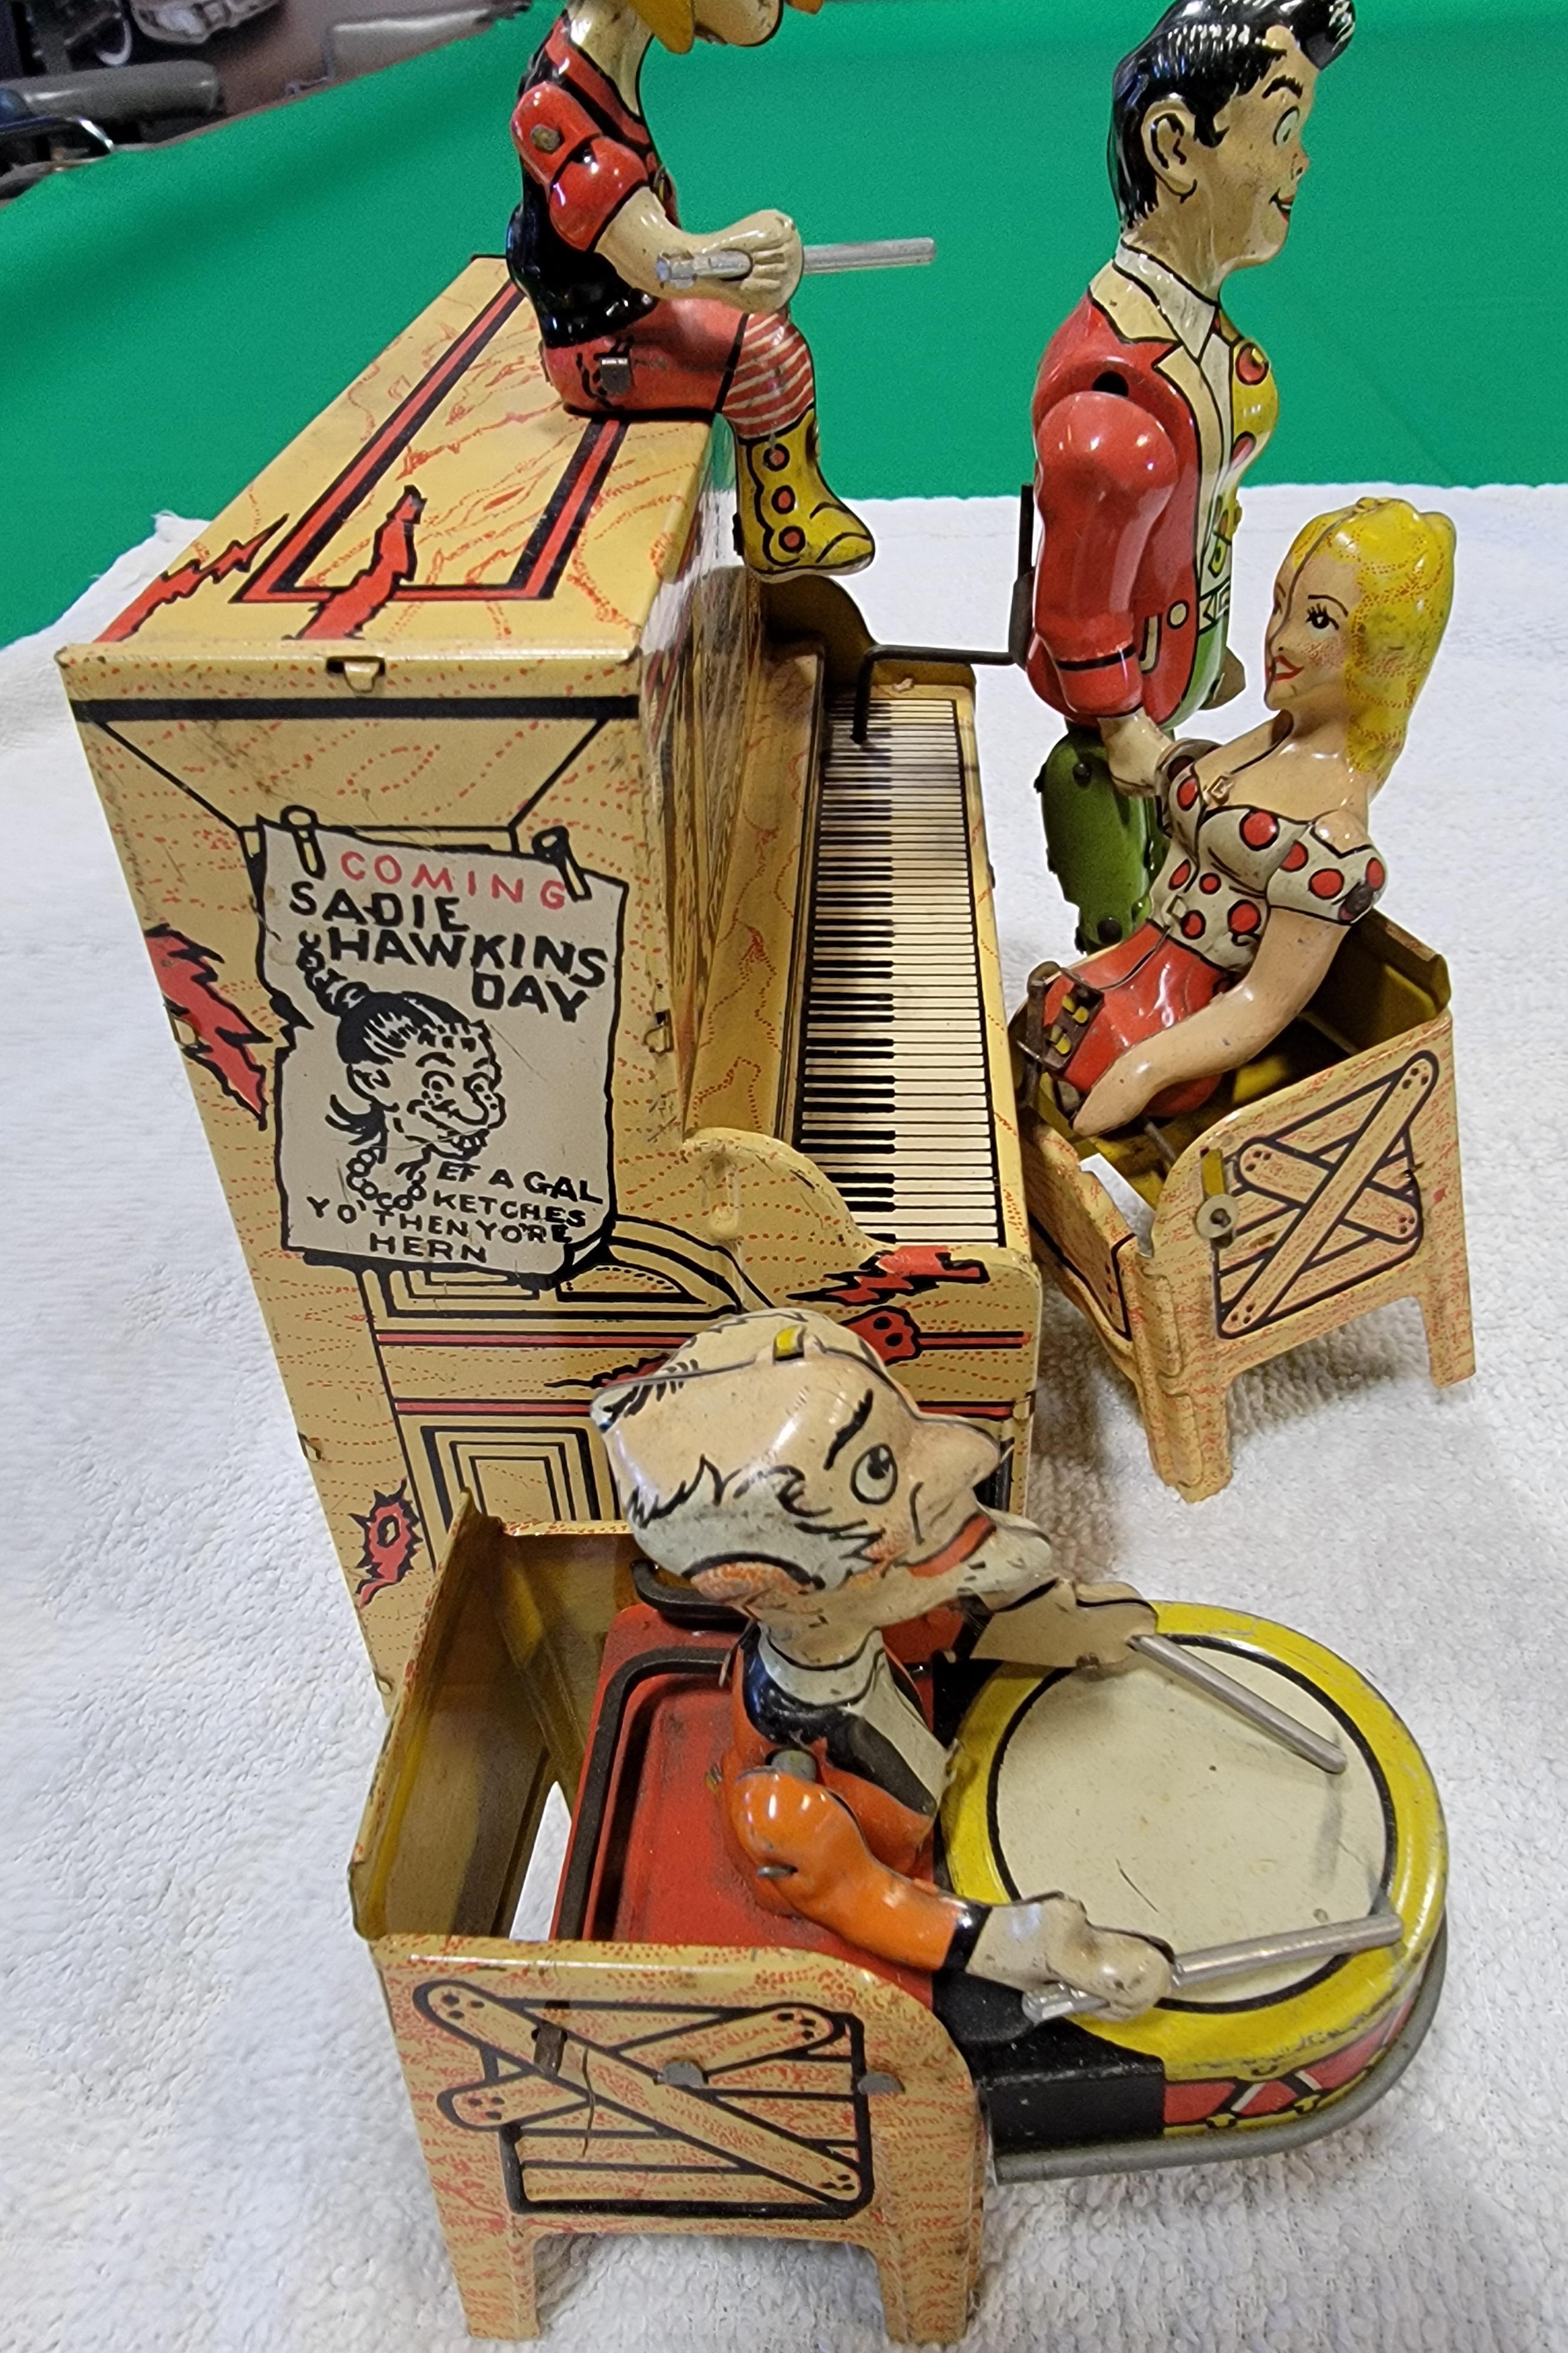 Li'l Abner Tin Lithograph Mechanical Wind-Up Piano Band Toy In Good Condition For Sale In Fulton, CA